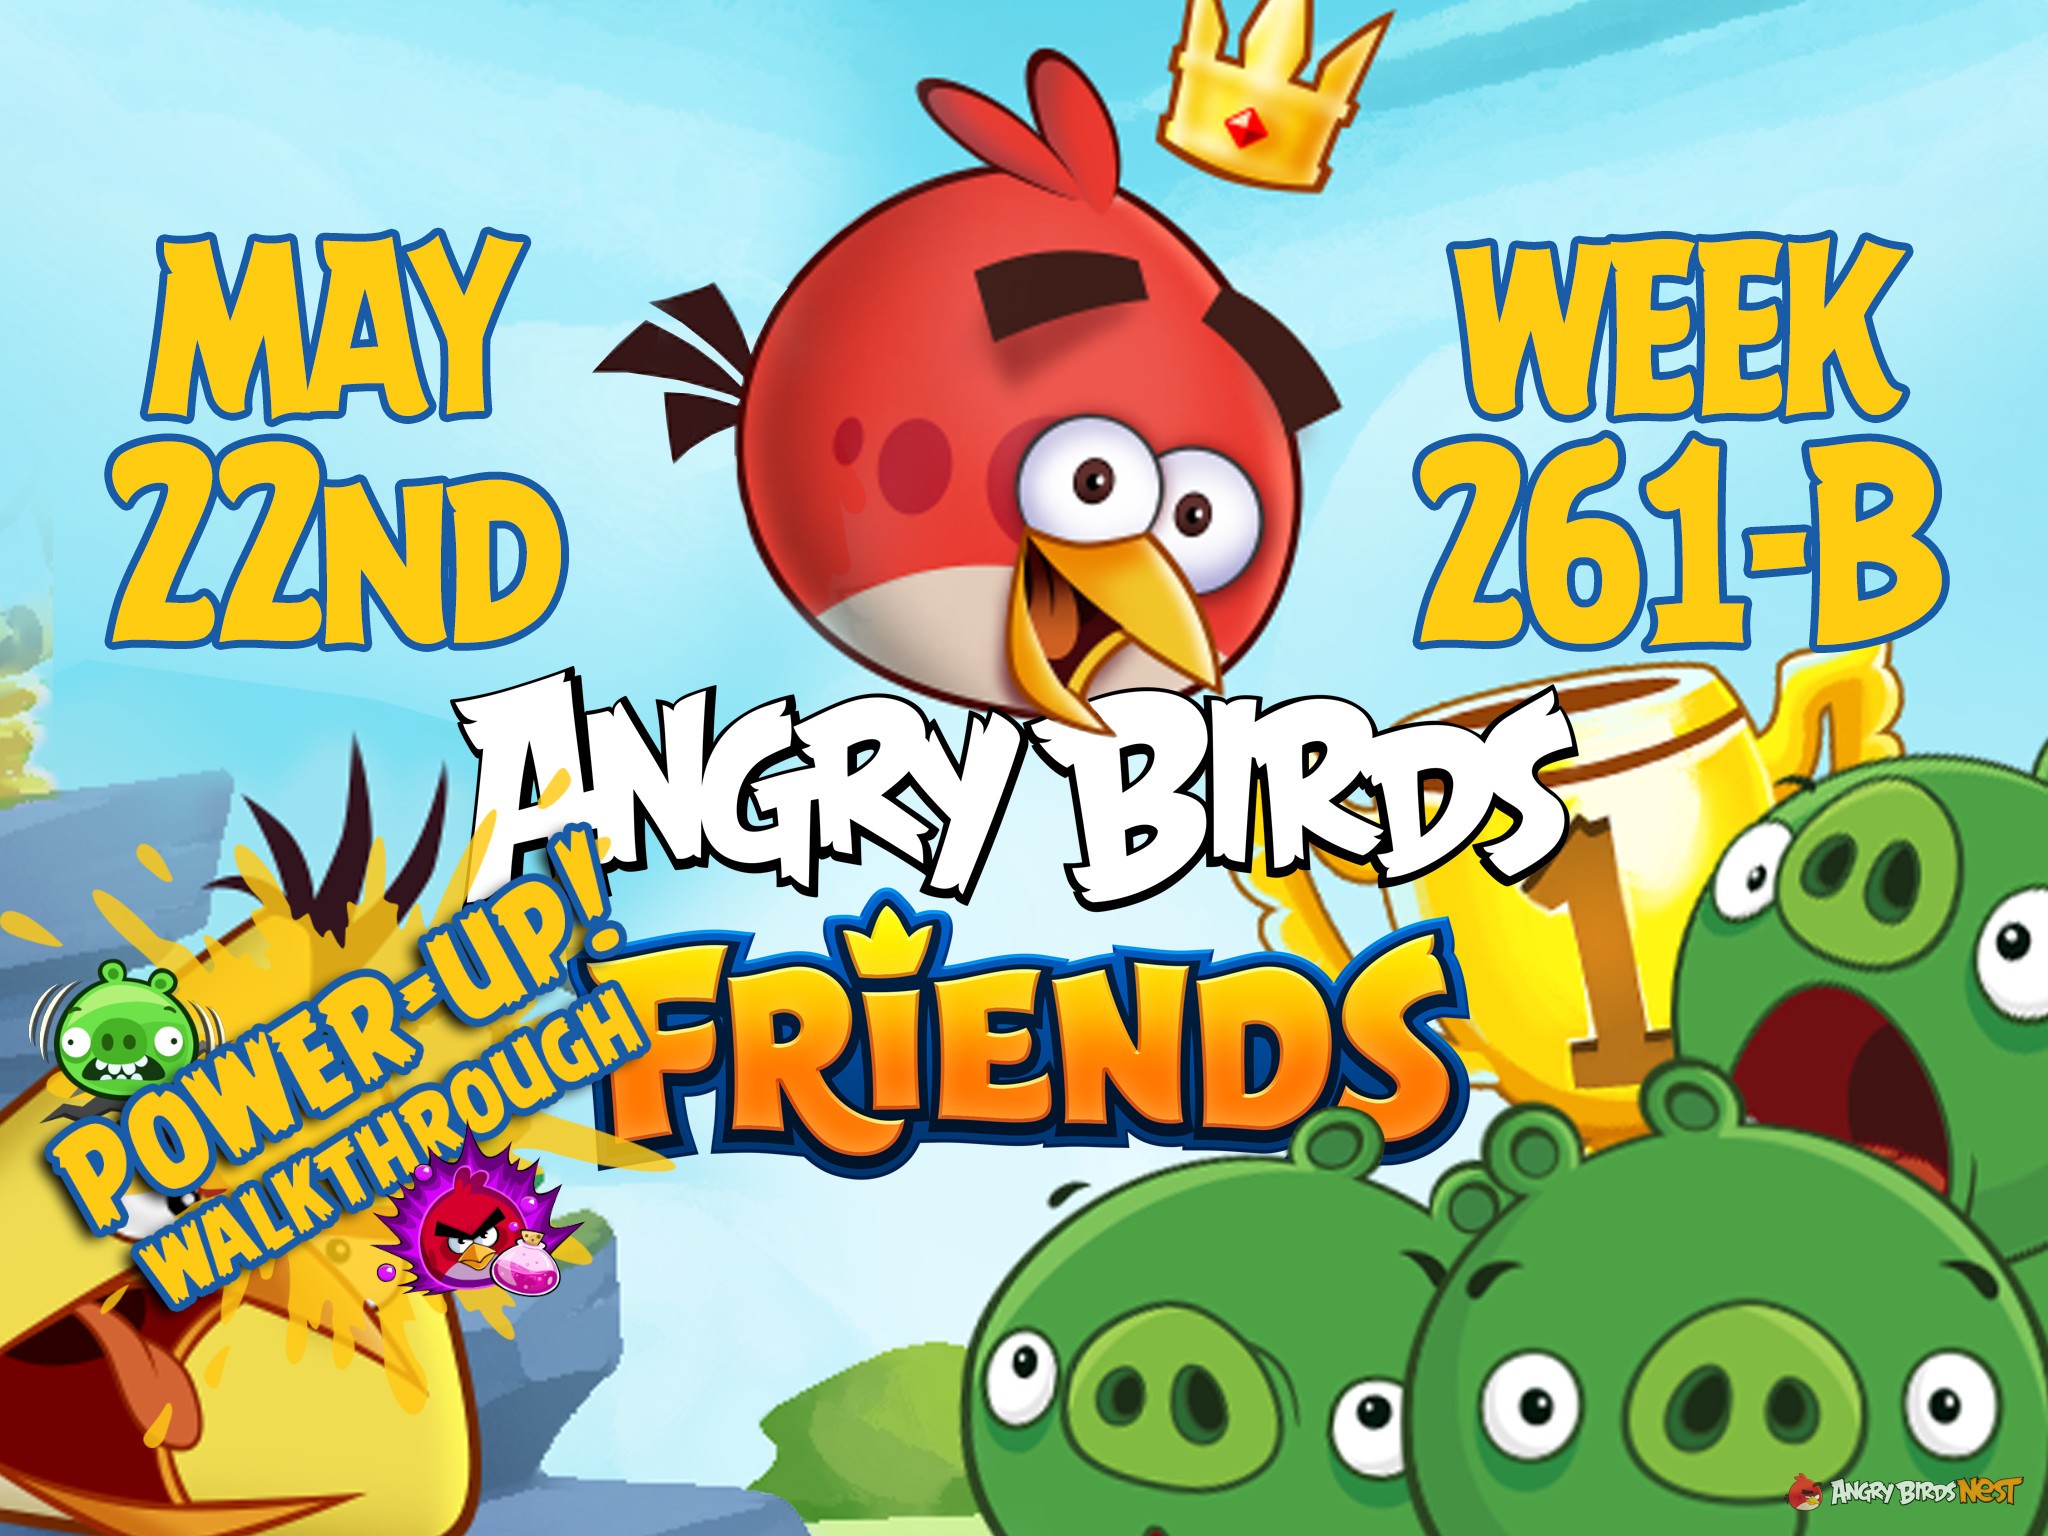 Angry Birds Friends Tournament Week 261-B Feature Image PU